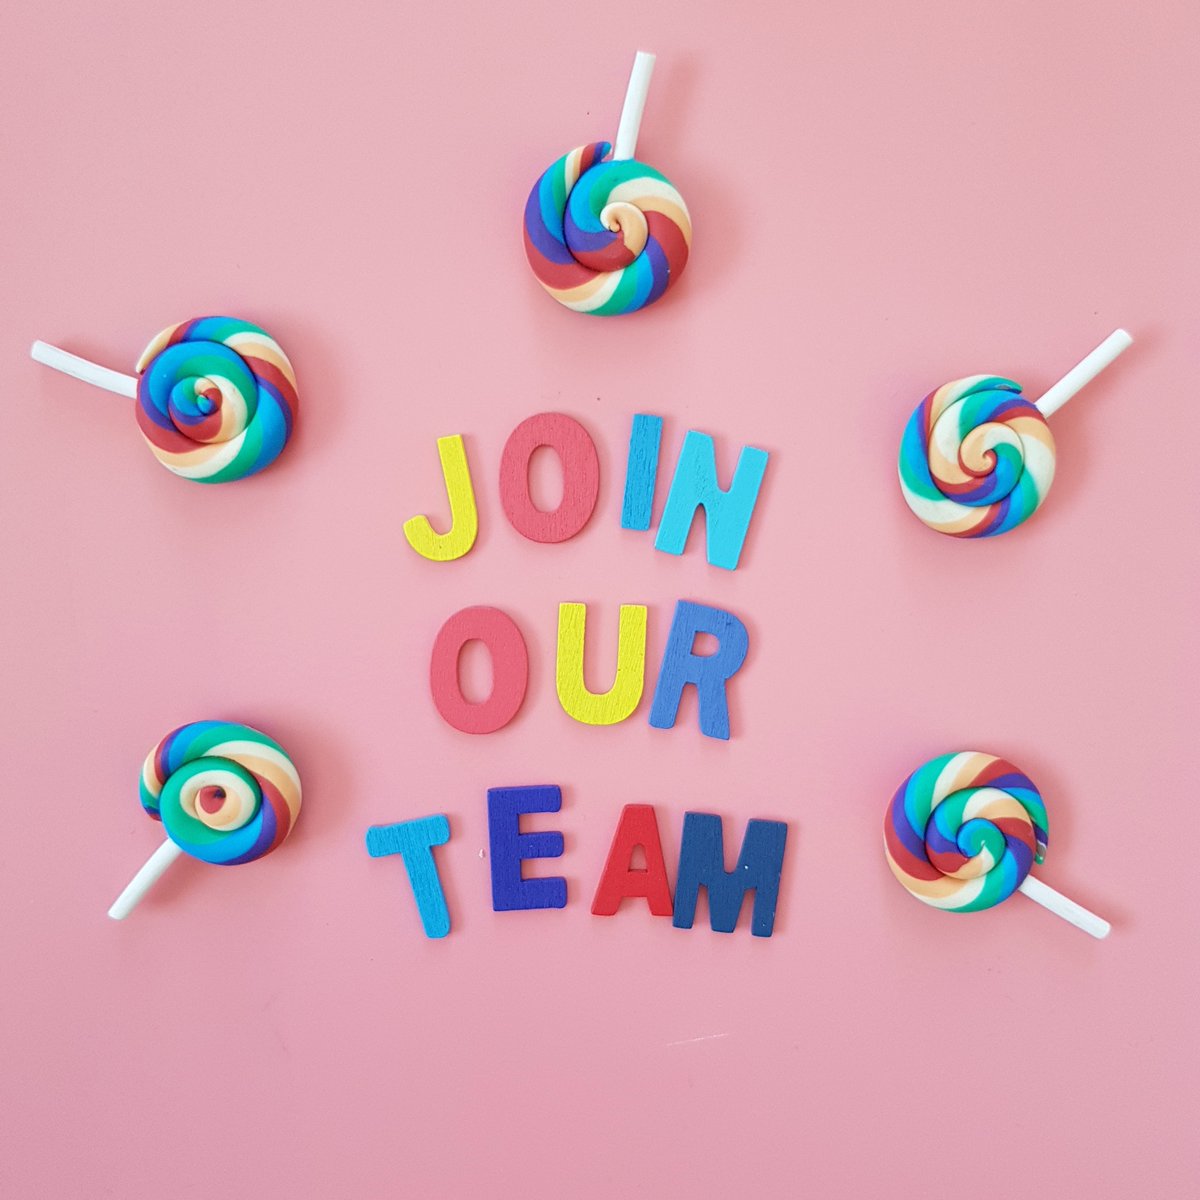 We have a #jobvacancy for a market staff trader to work with us when we appear at events in #Southampton with our bakes. Own, clean transport is required! Various hours. More info at bit.ly/3ZrD8em #Southampton #JobVacancies #Recruitment #SouthamptonJobs @communicare_so